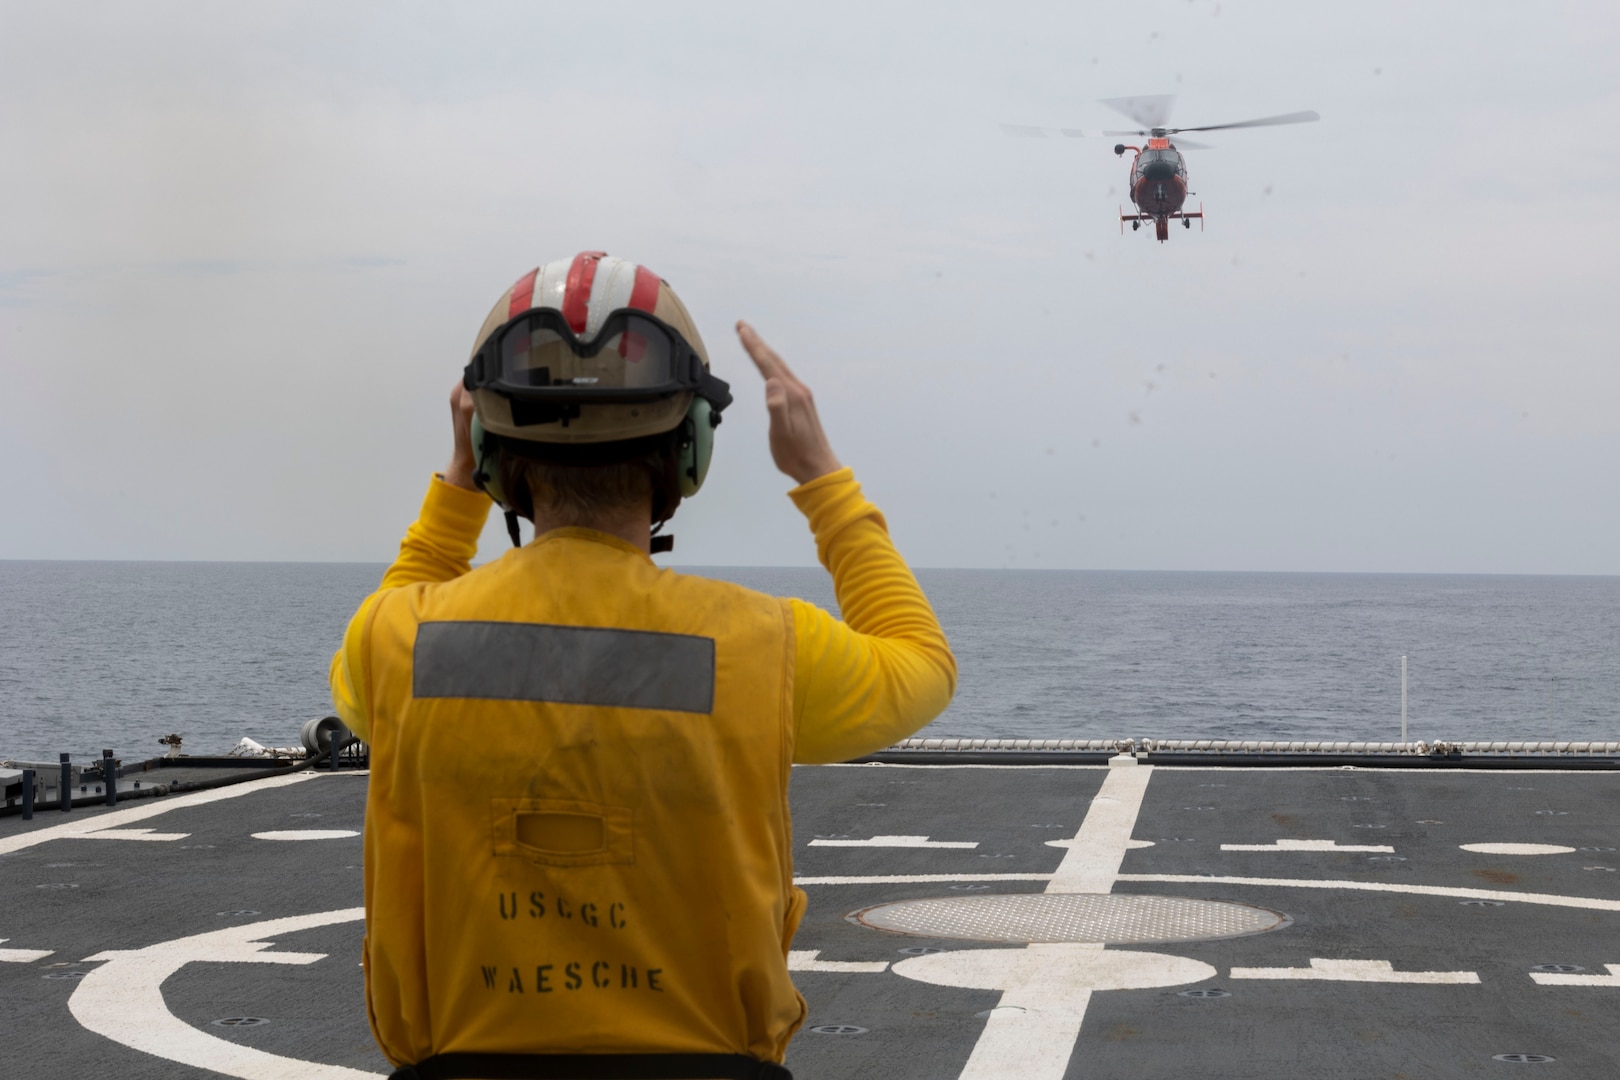 U.S. Coast Guard Ens. Henry Arnold, a deck watch officer assigned to the U.S. Coast Guard Cutter Waesche (WMSL-751), guides a U.S. Coast Guard MH-65E helicopter onto the flight deck of the Waesche during a trilateral search and rescue exercise in the East Sea, June 6, 2024. Coast Guardsmen from Japan, Republic of Korea, and the United States participated in the first joint trilateral search and rescue exercise between the three nations, working together to improve interoperability when responding to a real-world crisis. The U.S. Coast Guard has operated in the Indo-Pacific for more than 150 years, and the service is increasing efforts through targeted patrols with our National Security Cutters, Fast Response Cutters and other activities in support of Coast Guard missions to enhance our partnership. (U.S. Marine Corps photo by Cpl. Elijah Murphy)